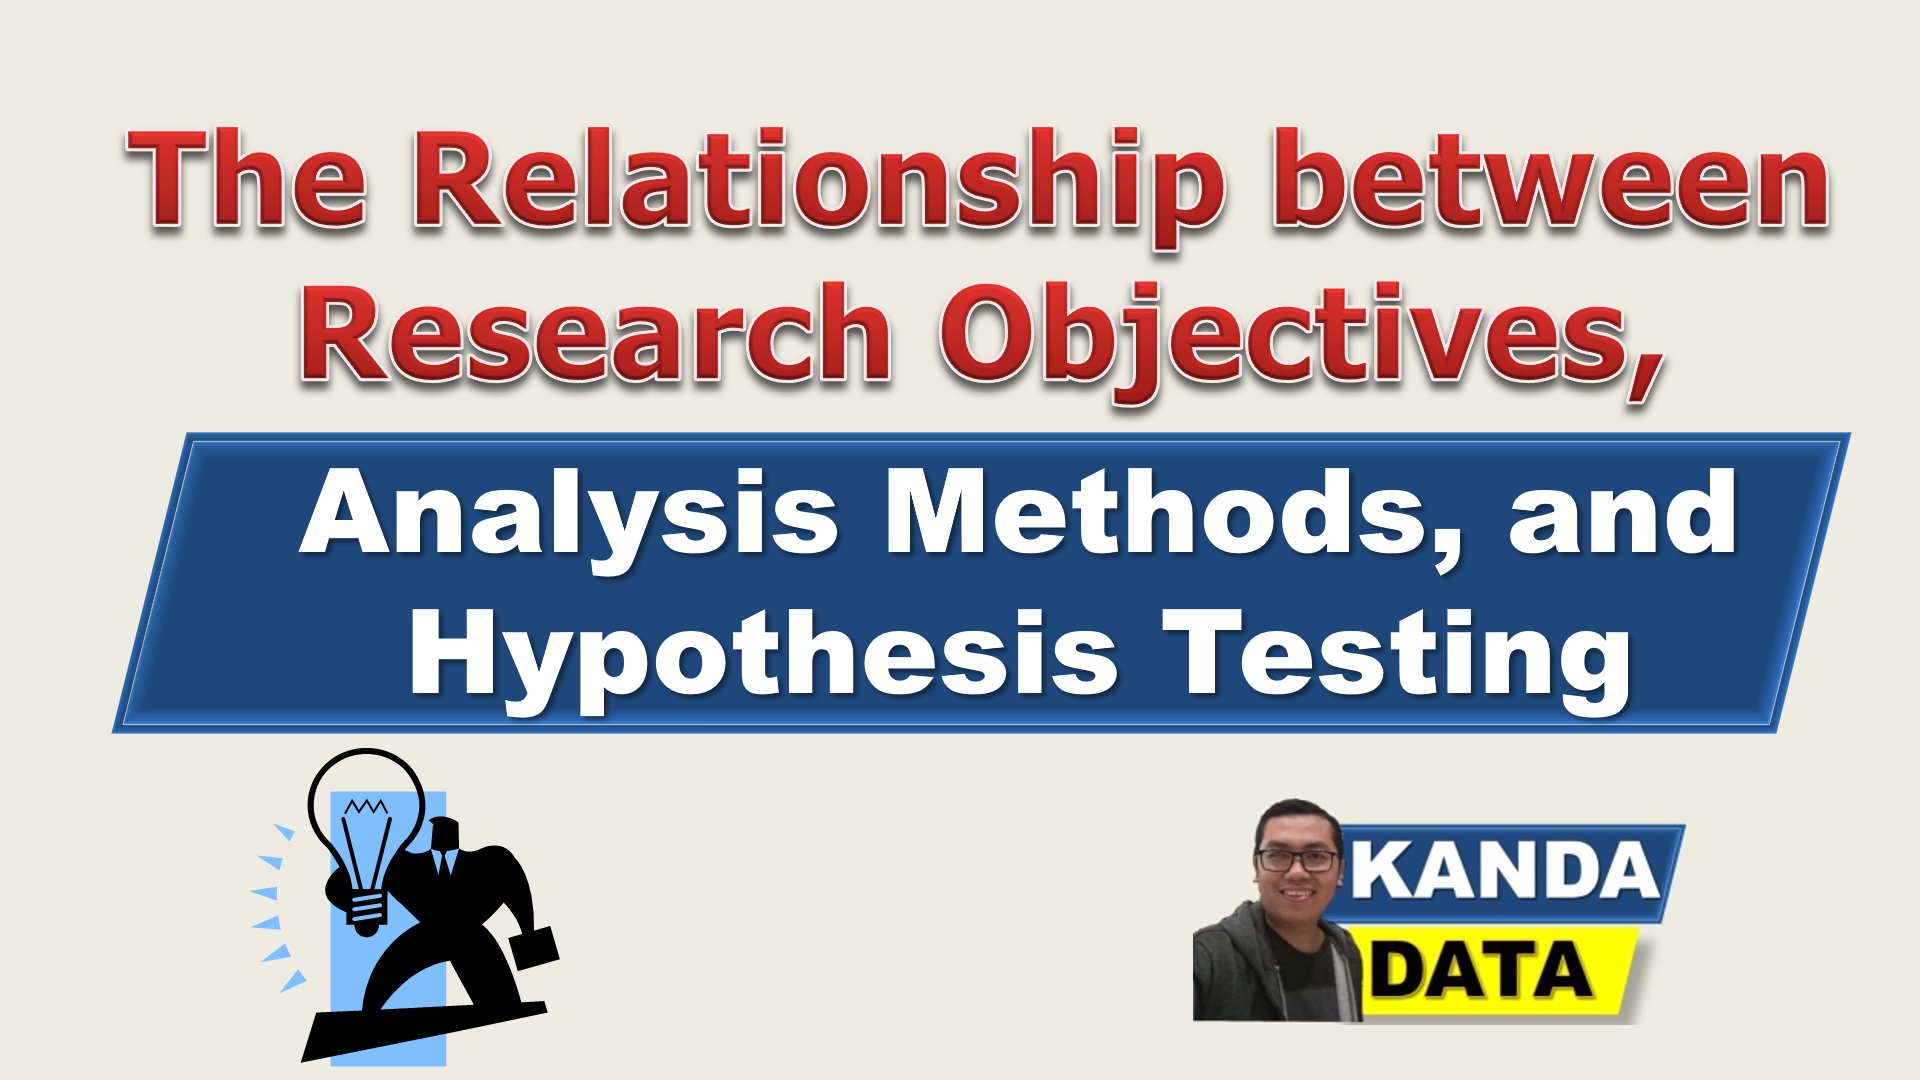 two research objectives and one method clearly stipulated